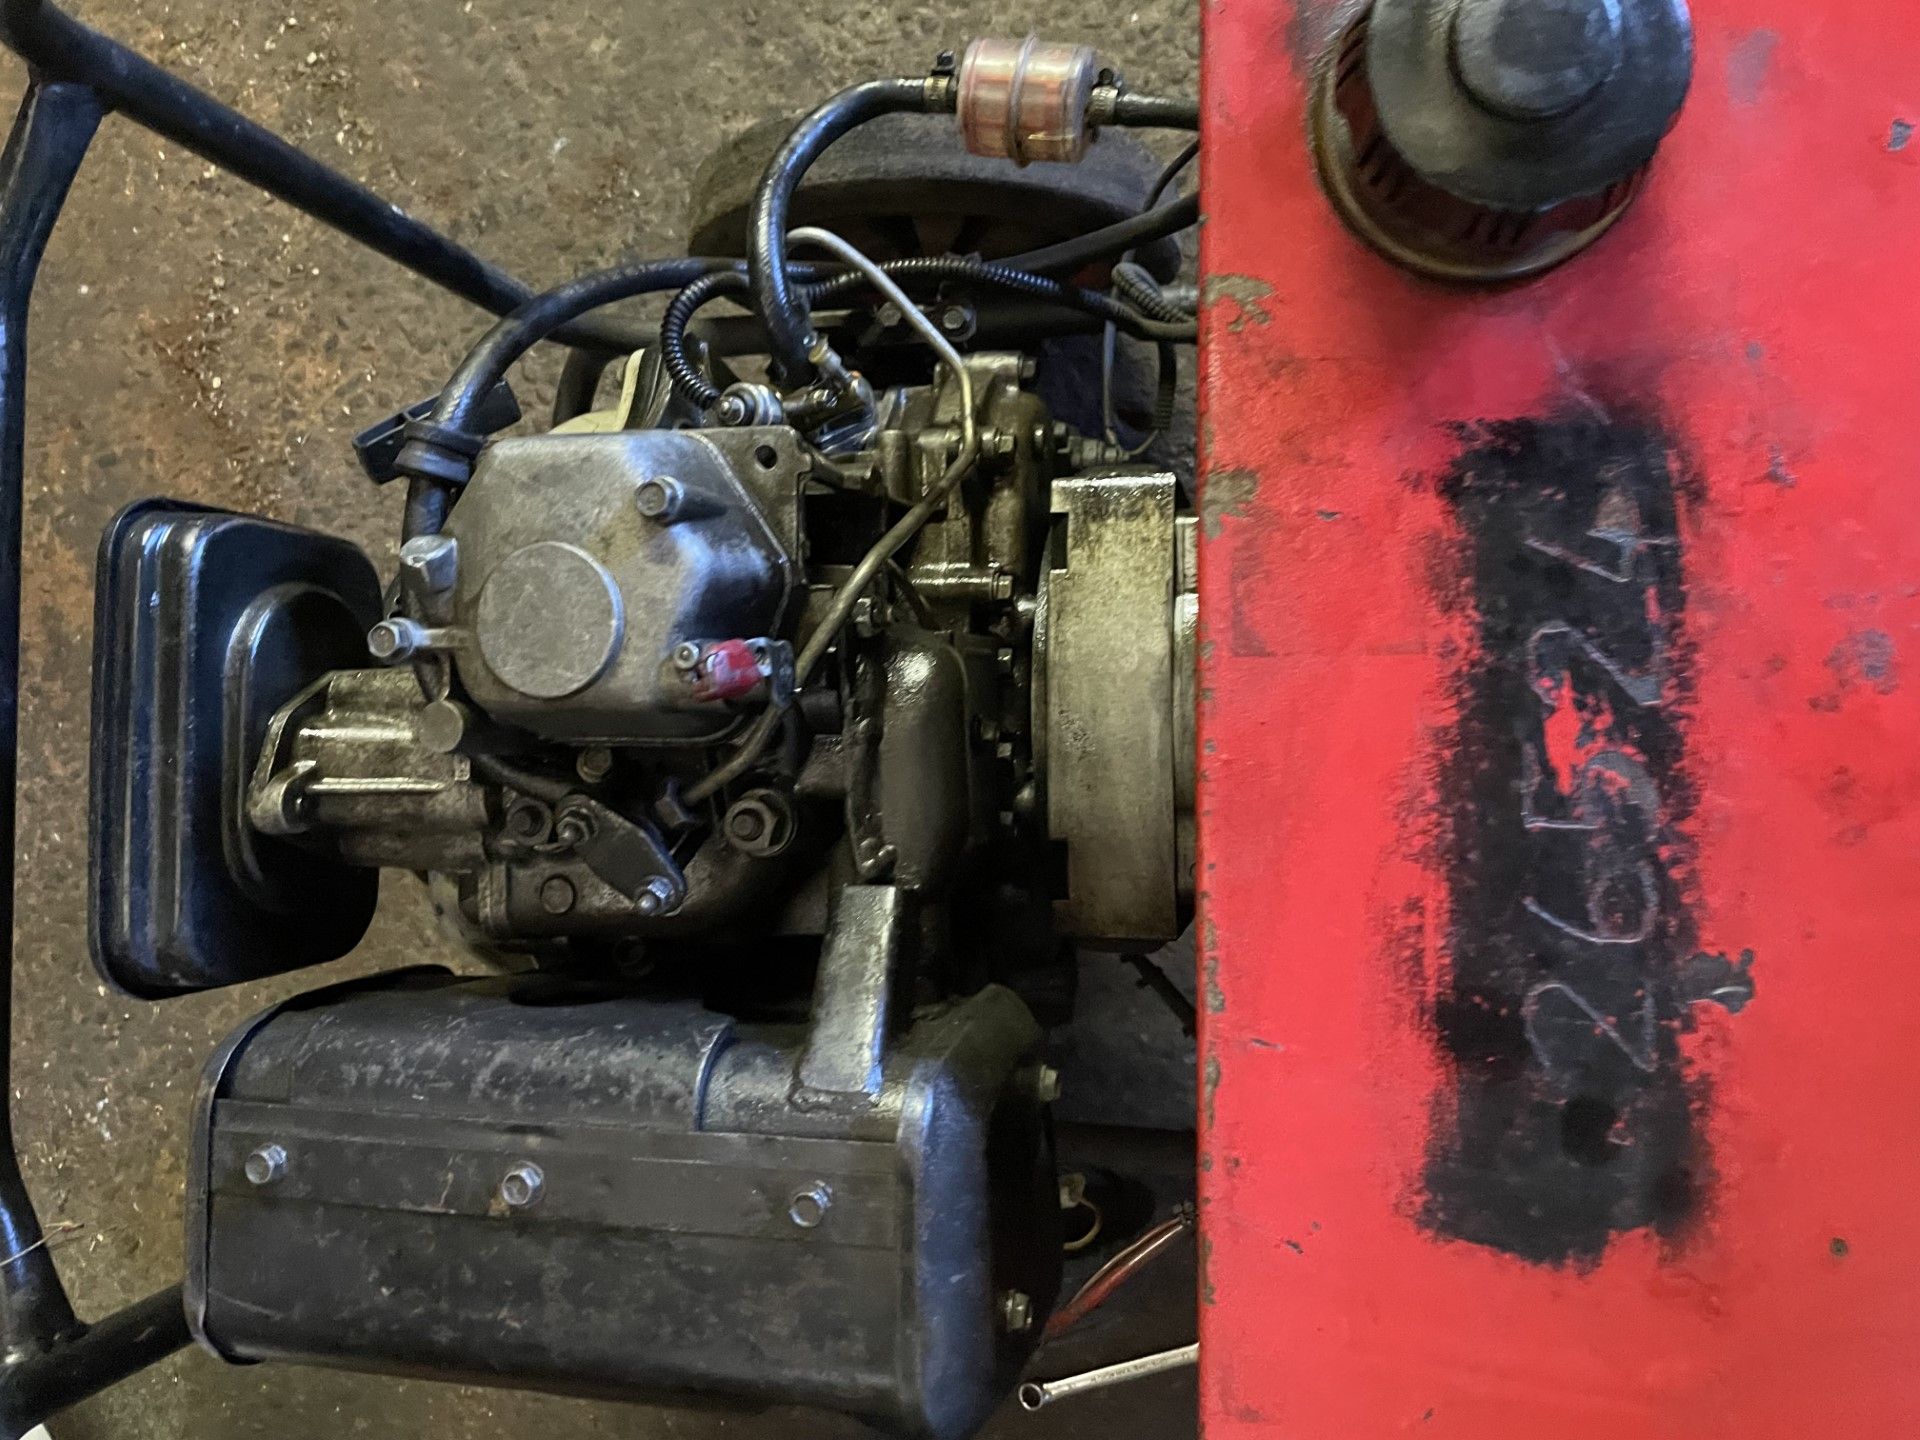 Generator with yanmar engine The engine sounds rough when you turn it over So could be a new - Image 5 of 7